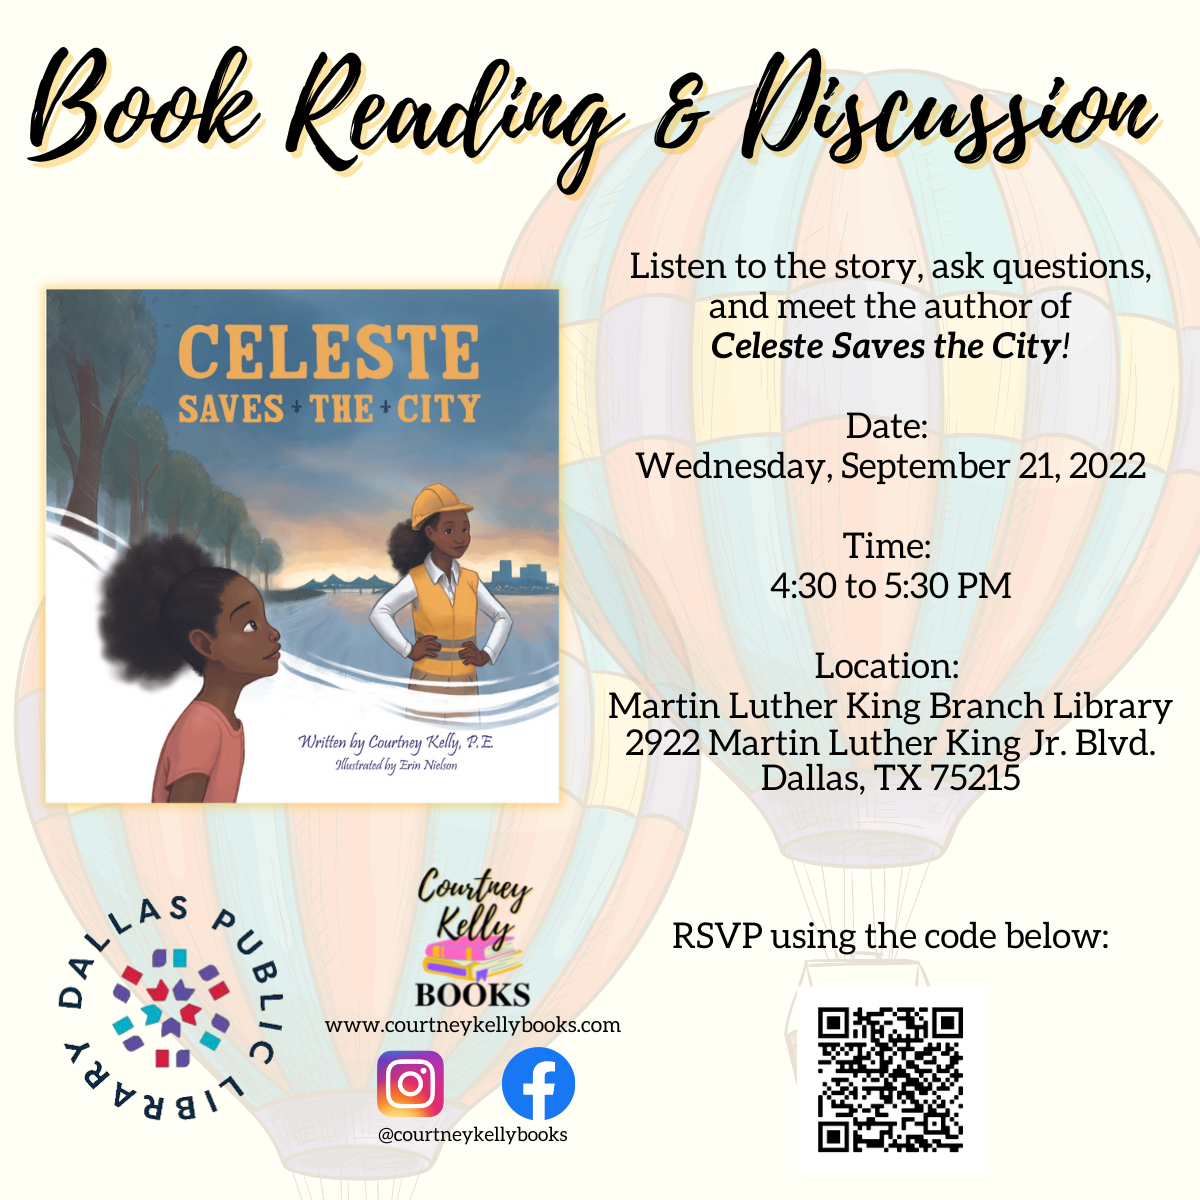 Book reading and discussion hosted by Courtney Kelly. Listen to the story, ask questions and meet the author of Celeste Saves the City! Date: Wednesday September 21, 2022 from4:30 to 5:30pm. This will take place at the Martin Luther King Branch library at 2922 Martin Luther King Jr. Blvd. Dallas, TX 75215. Learn more about Courtney at courtneykellybooks.com